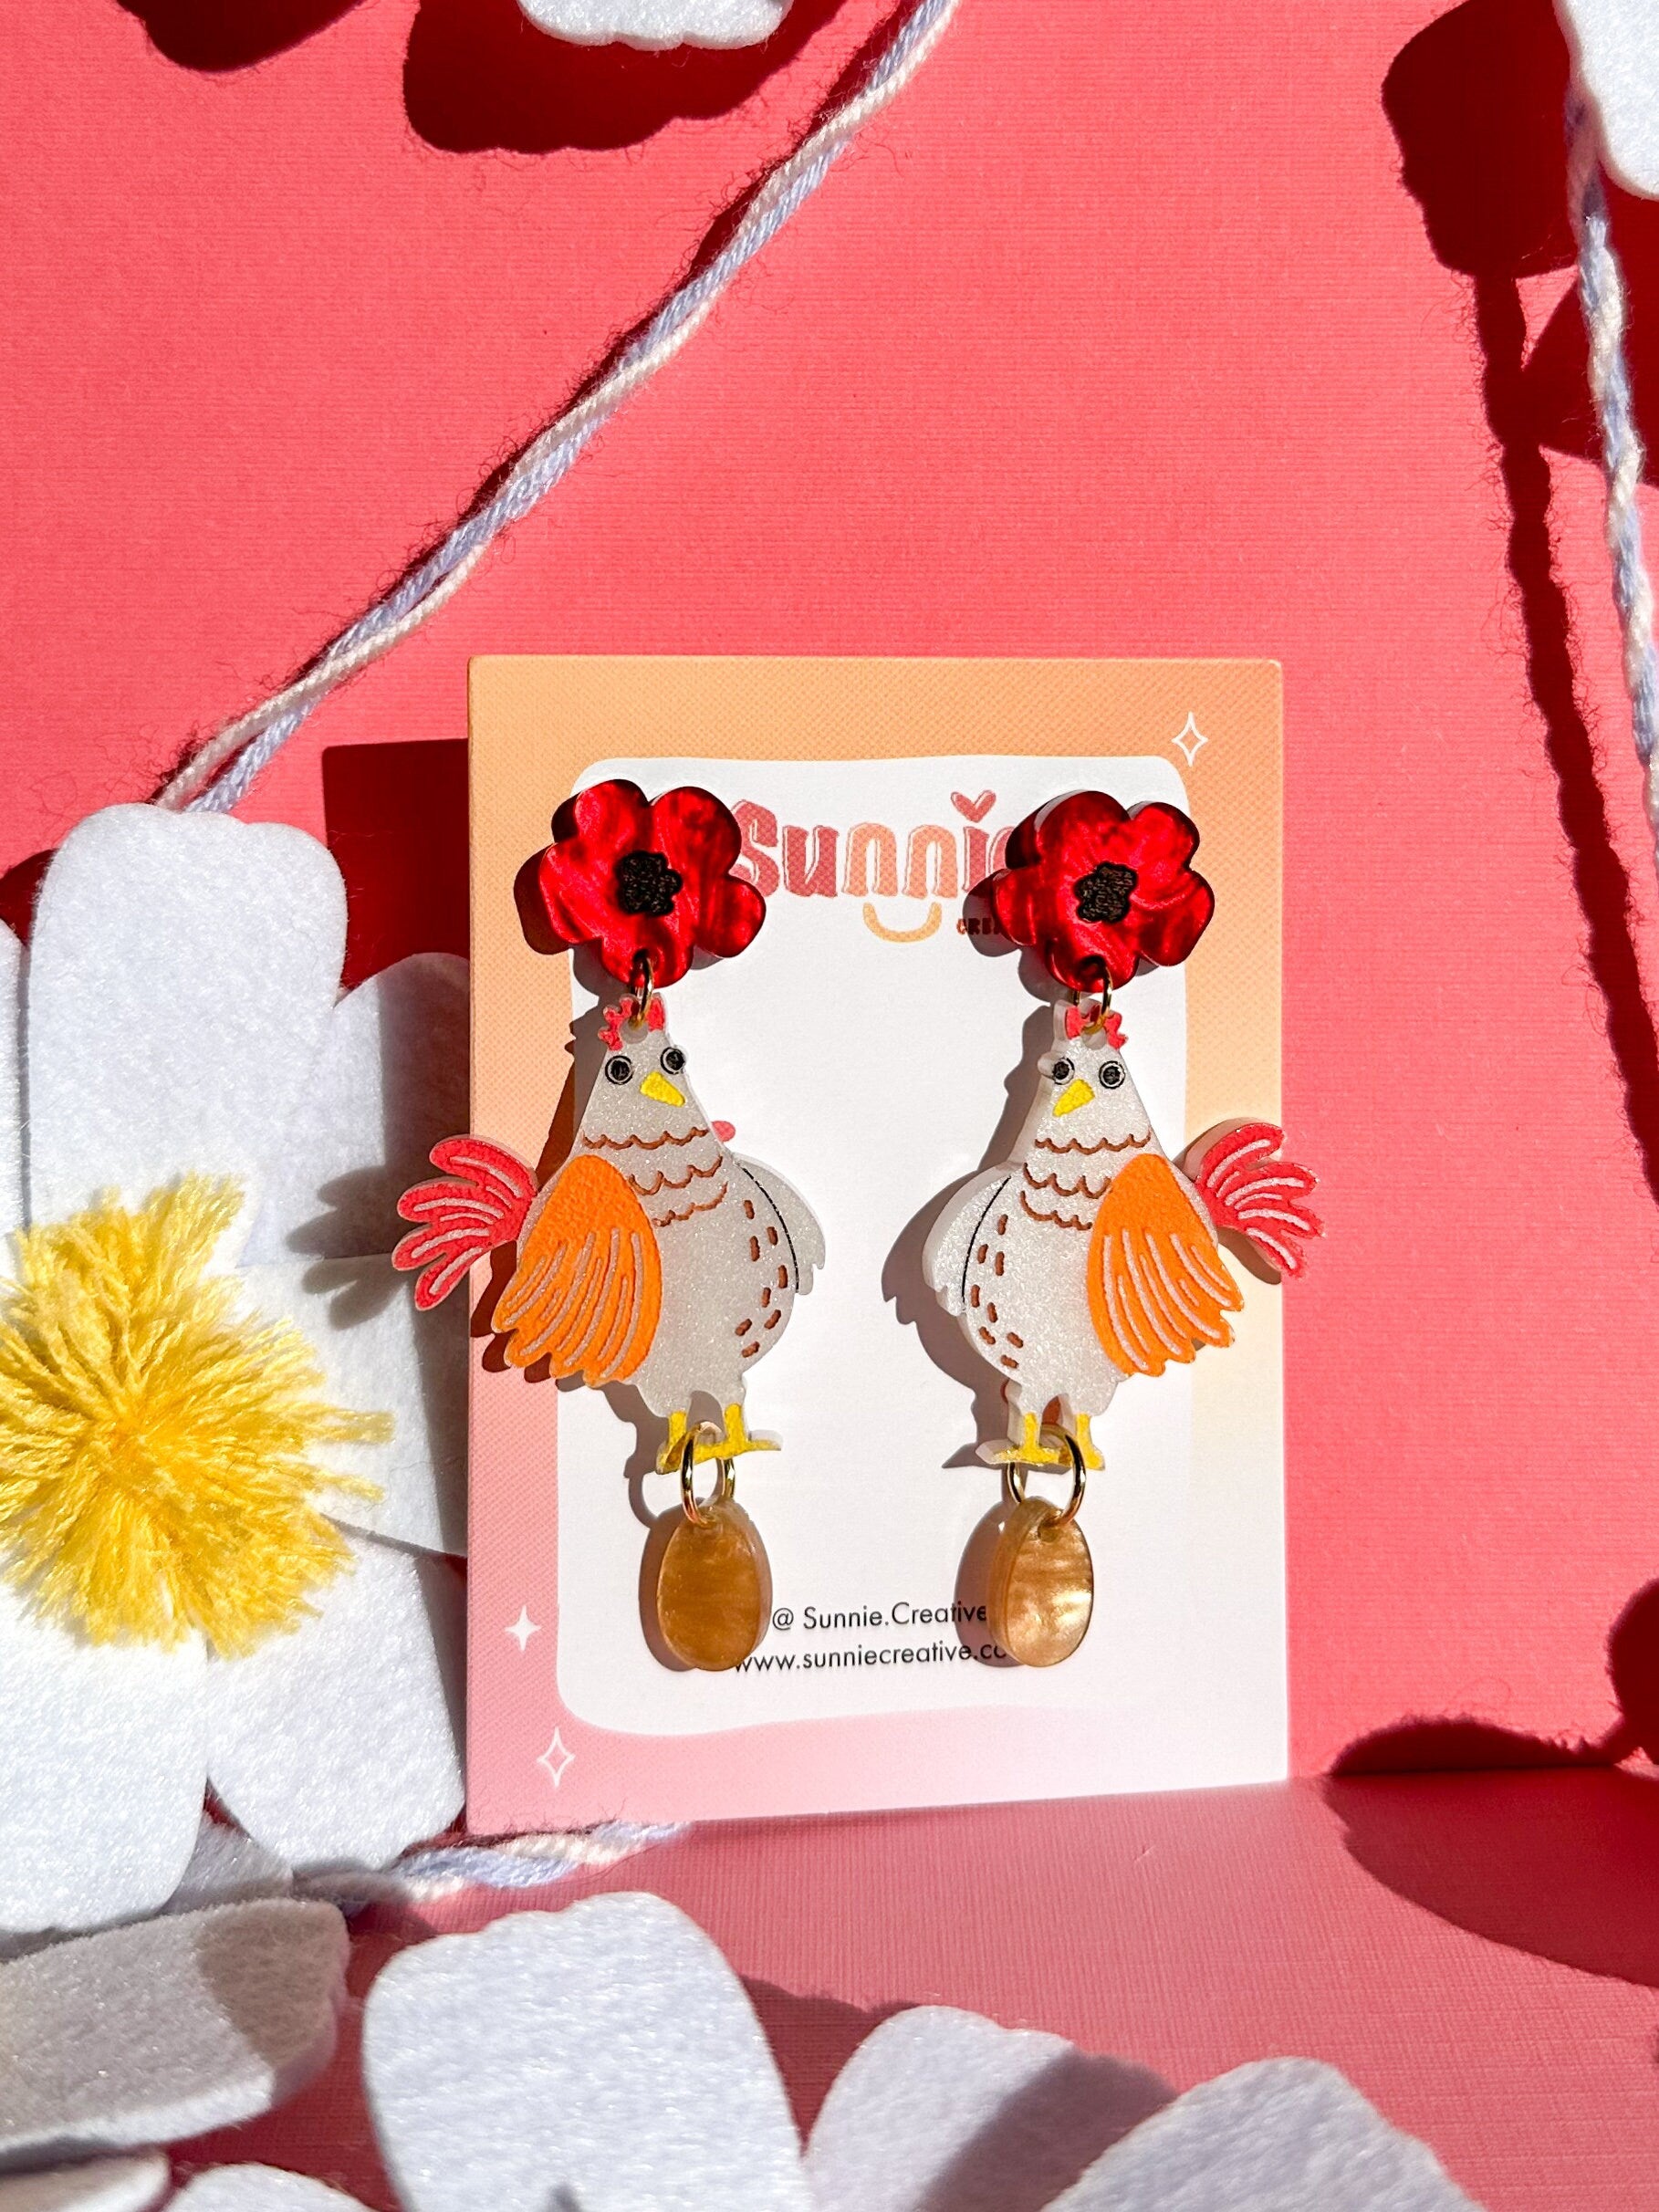 Nugget Chicken Earrings//Spring Earring//Statement Earring//Acrylic Earring//Animal Earrings//Spring Vibes//Gift for Her//Farm Chicken